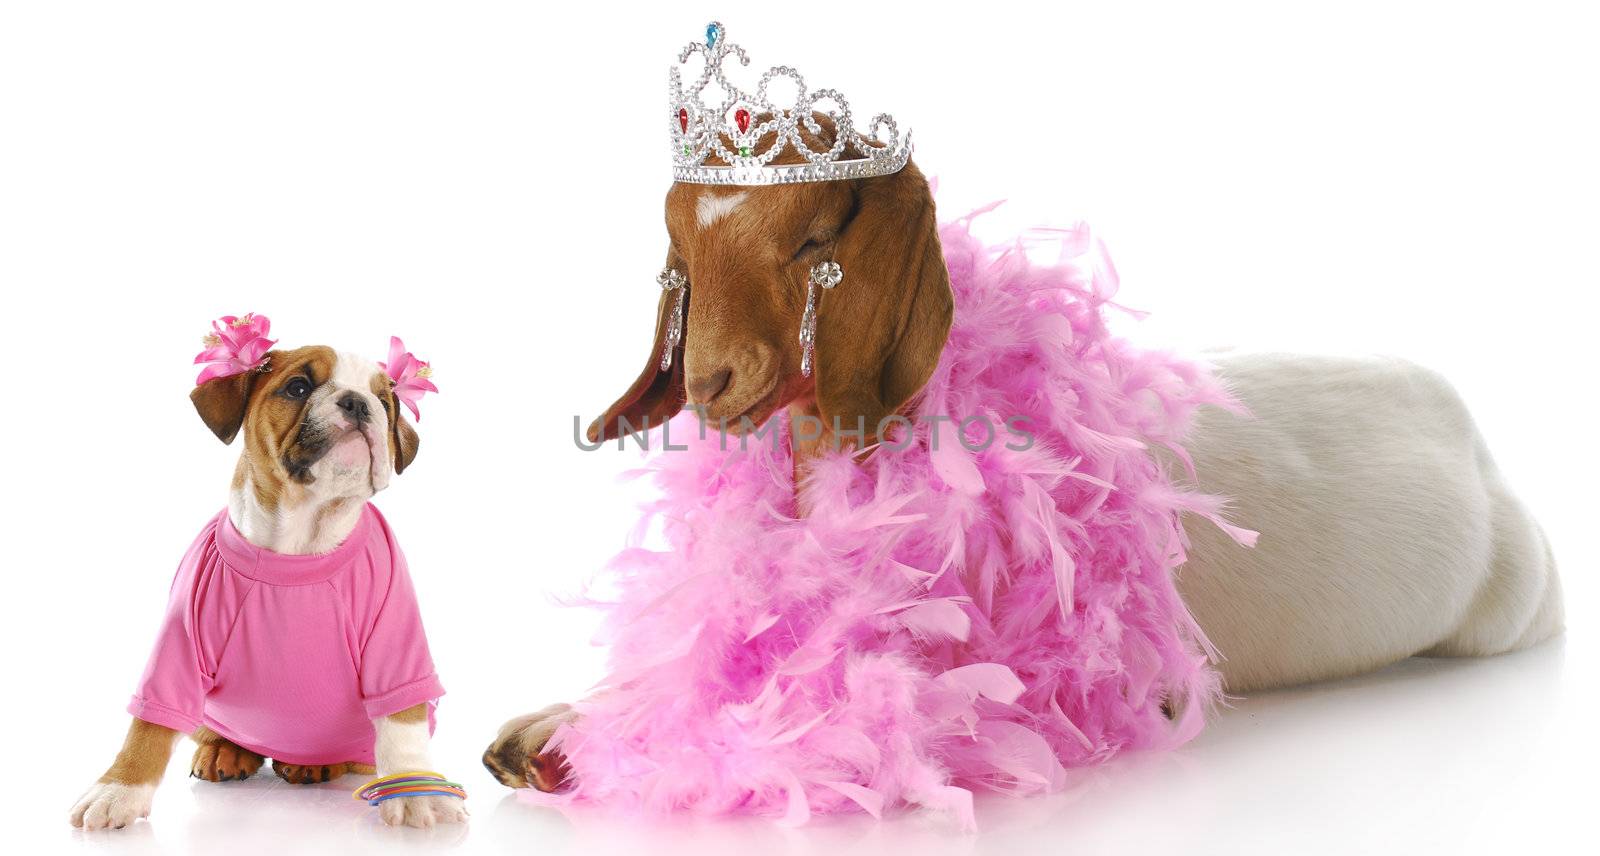 female bulldog puppy in pink looking up at goat dressed like a princess with reflection on white background